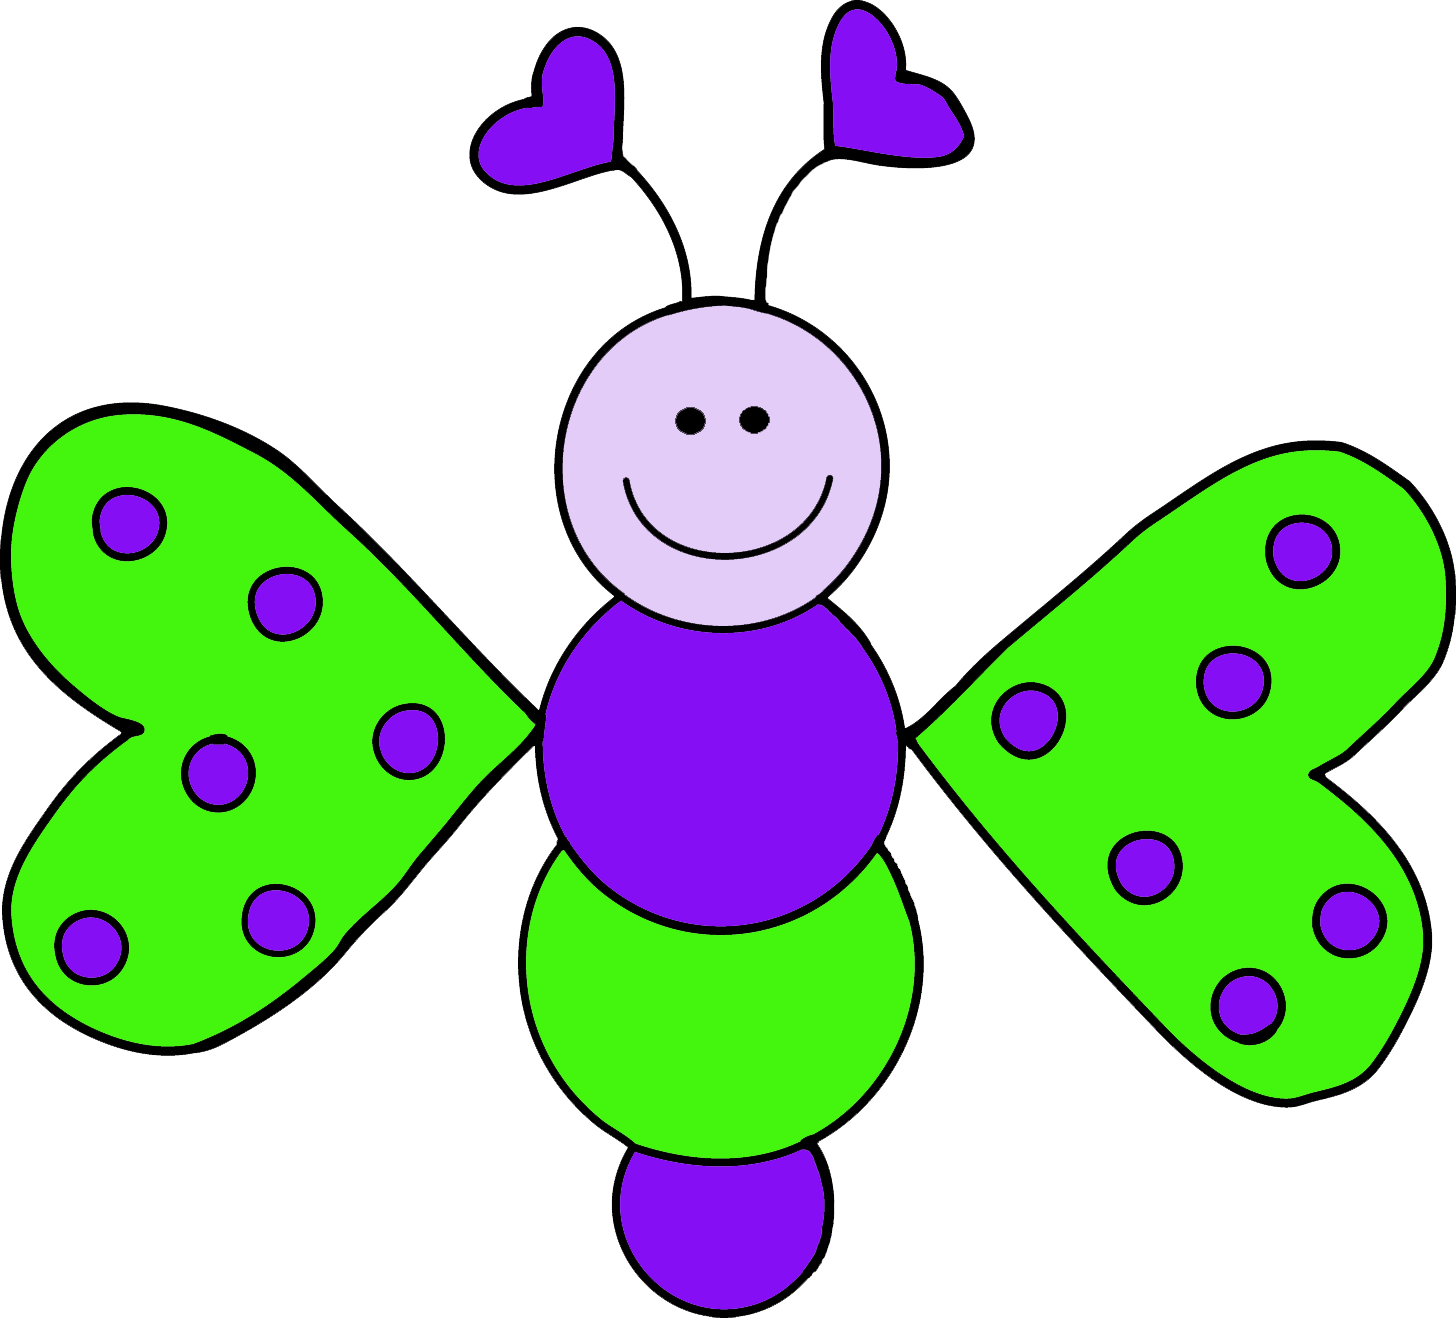 Please Let Me Know If You Download The Butterflies - Butterfly Clipart (1456x1318)